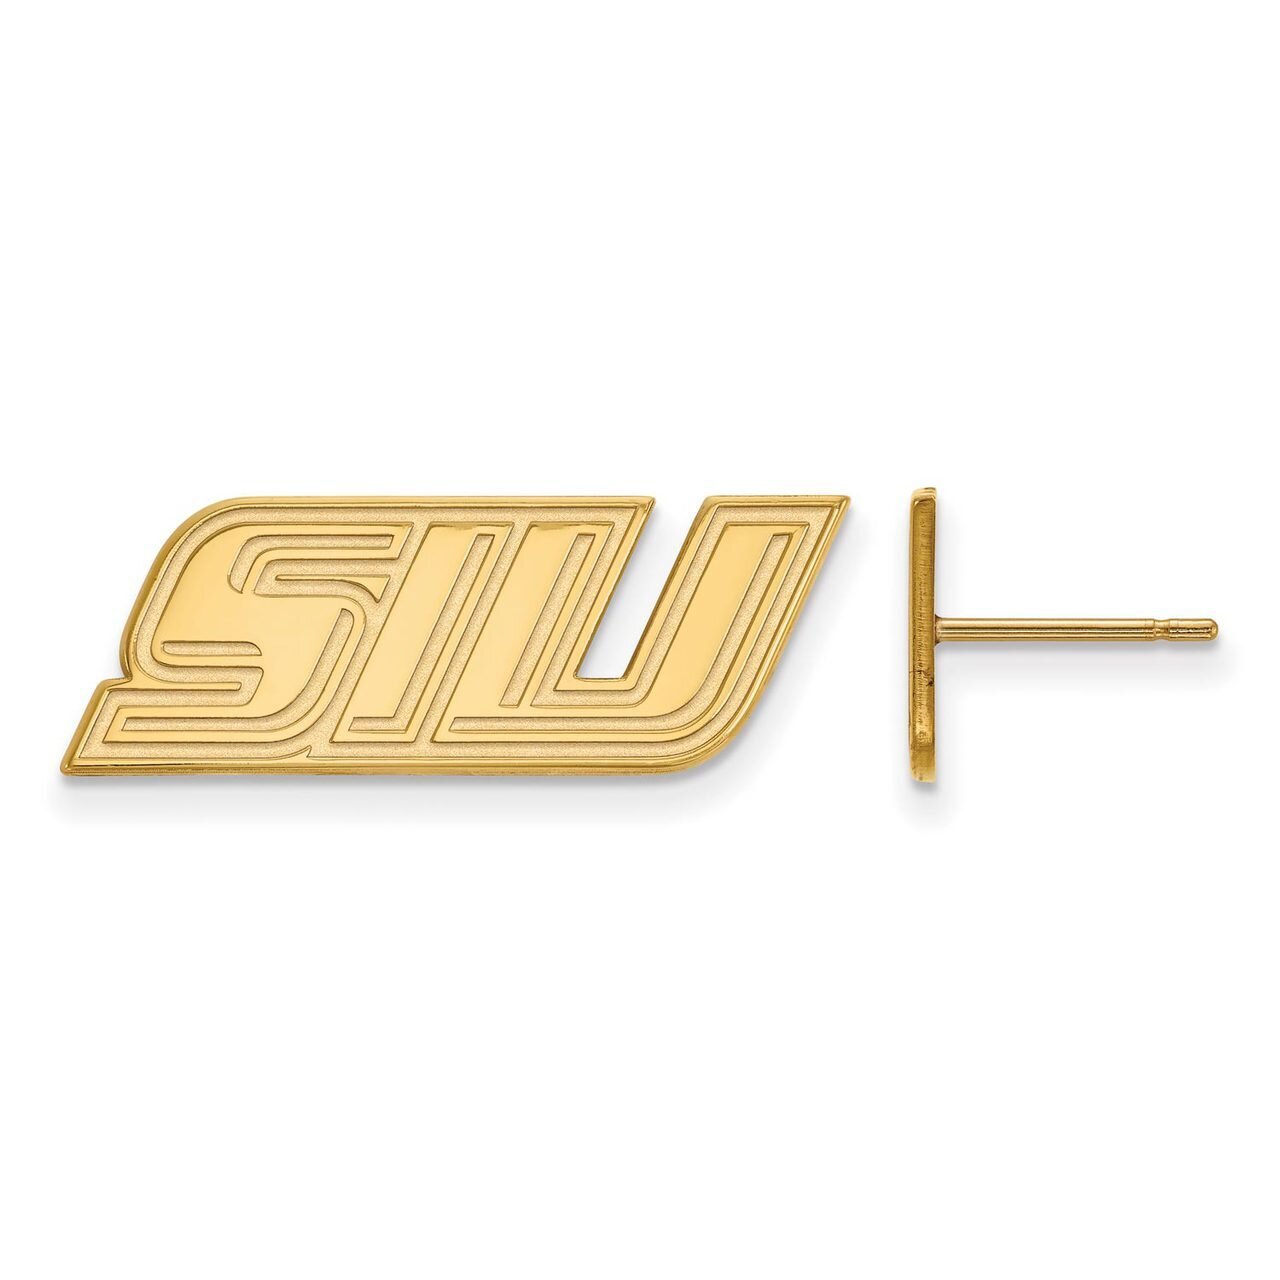 Southern Illinois University x-Small Post Earring Gold-plated Silver GP007SIU